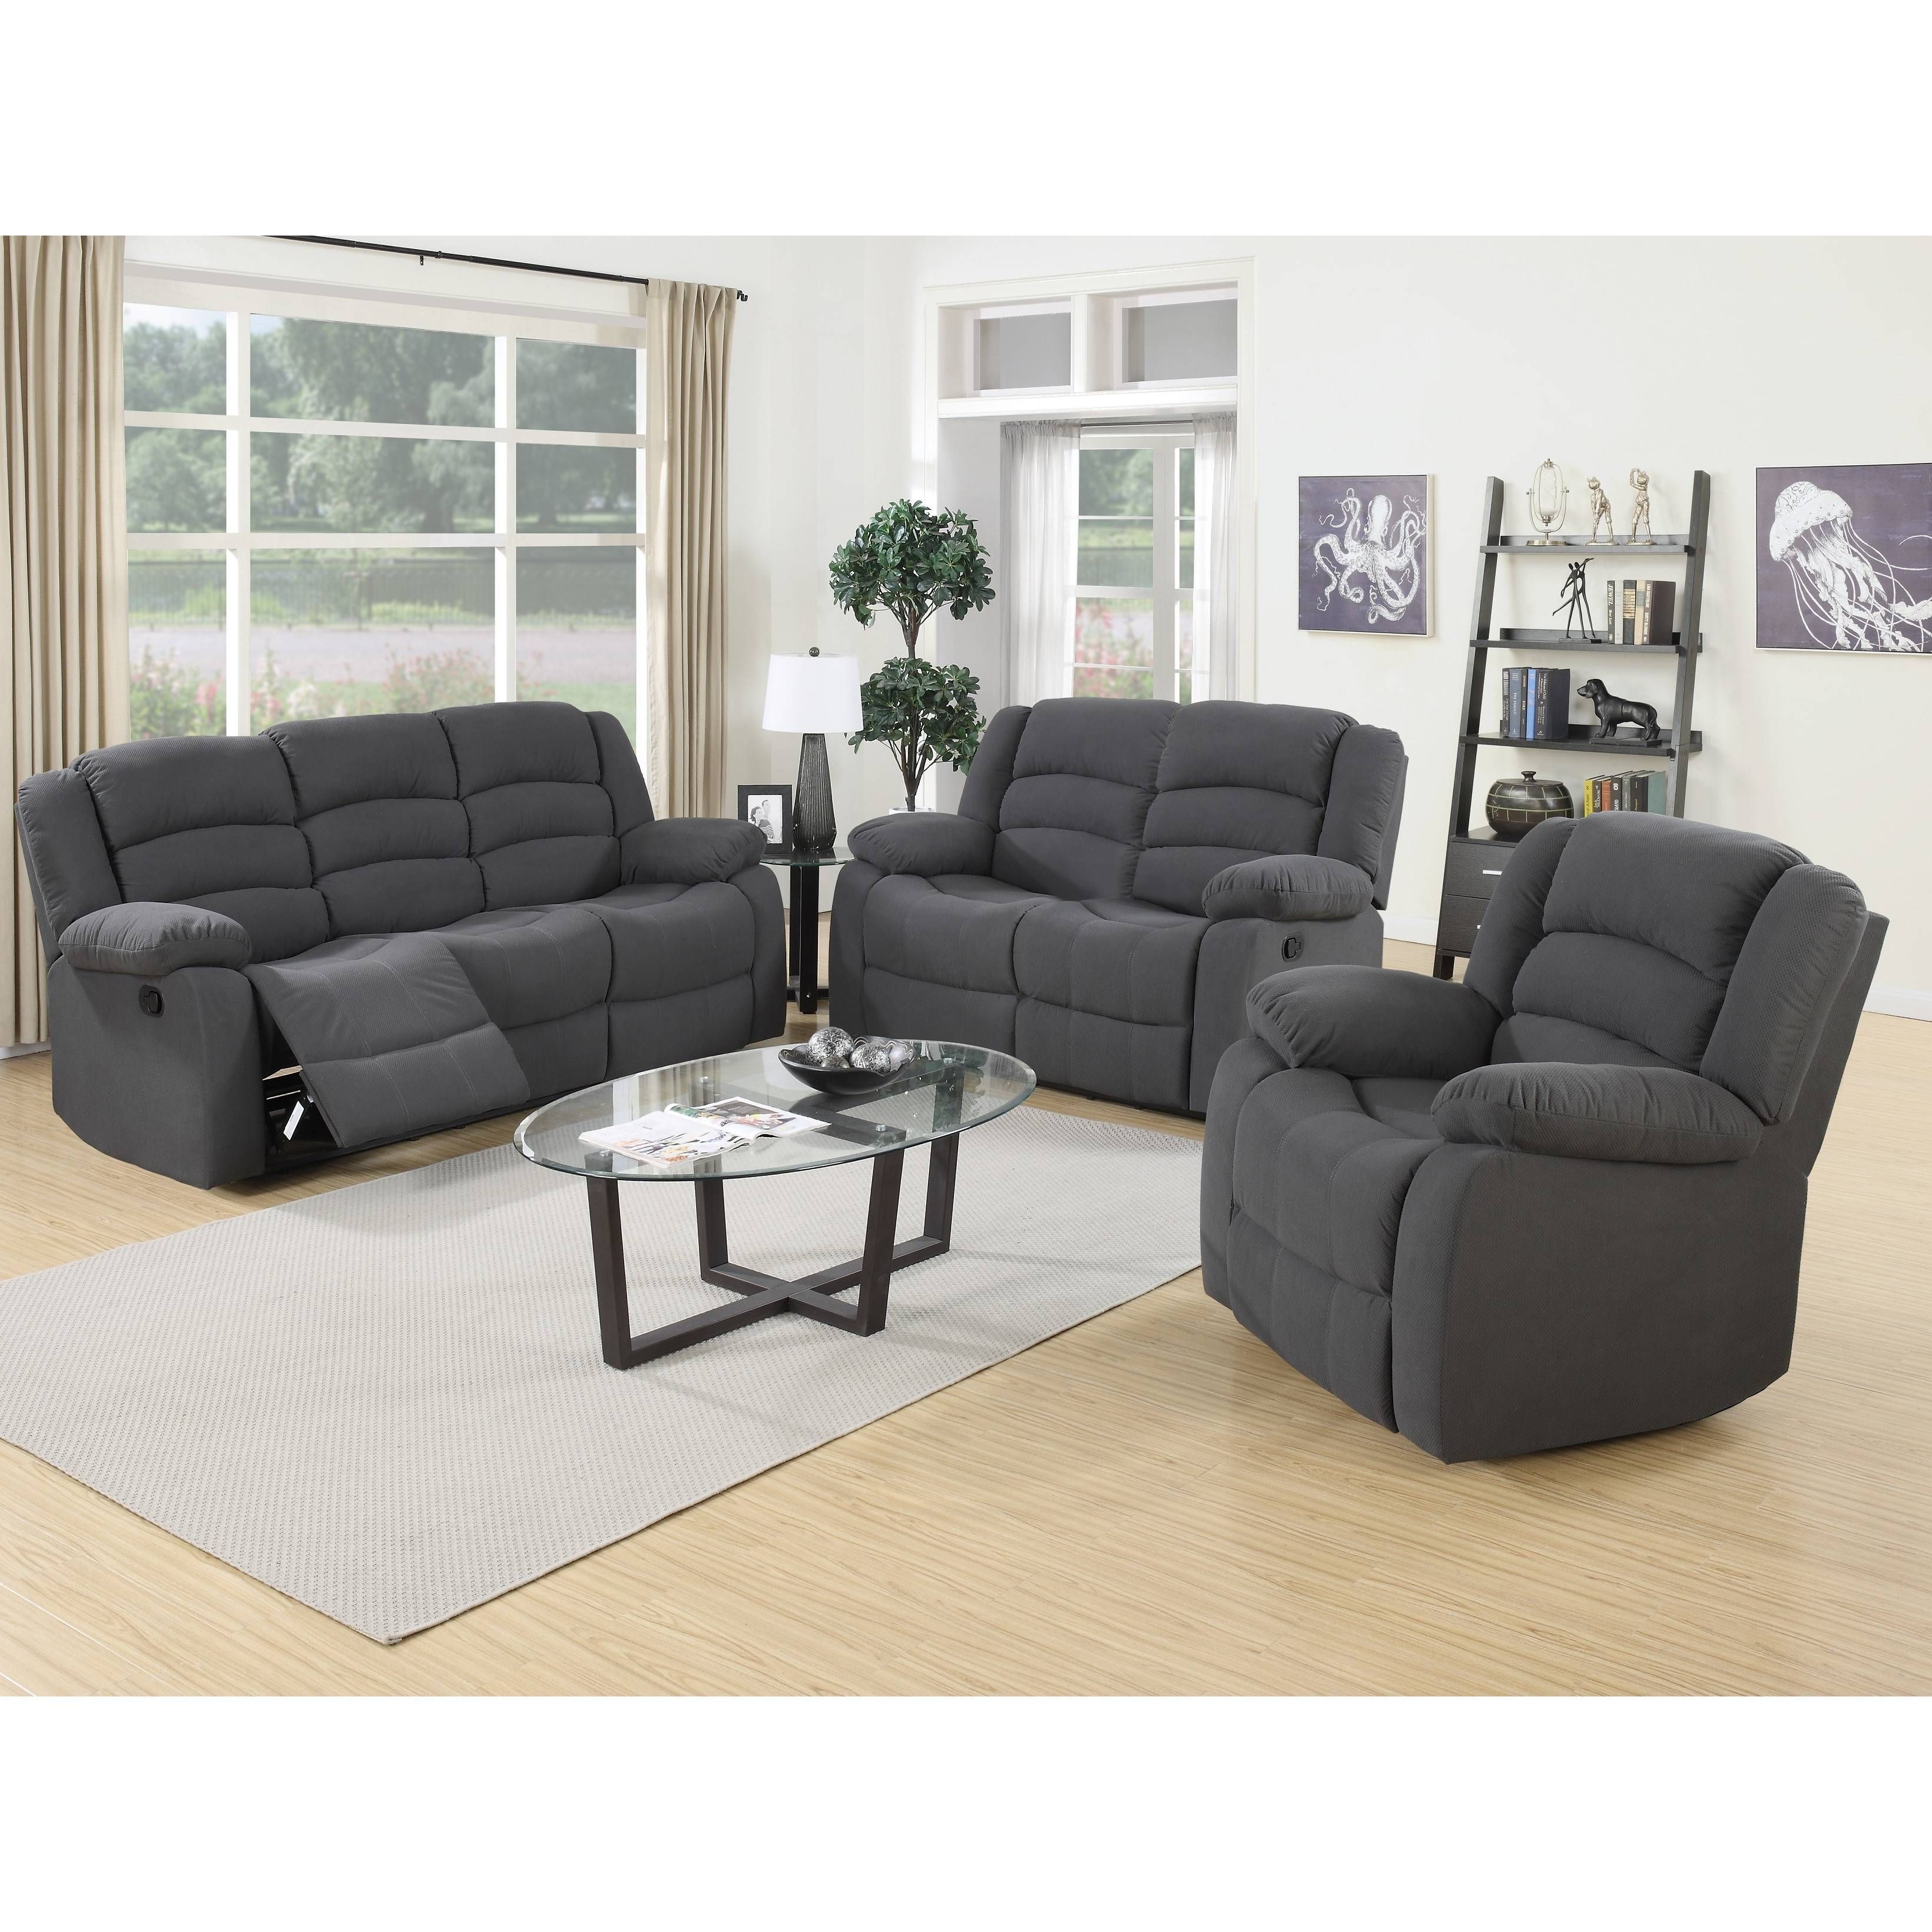 Trend Recliner Sofa Sets 53 On Living Room Sofa Inspiration With In Sofa Trend (Photo 8 of 25)